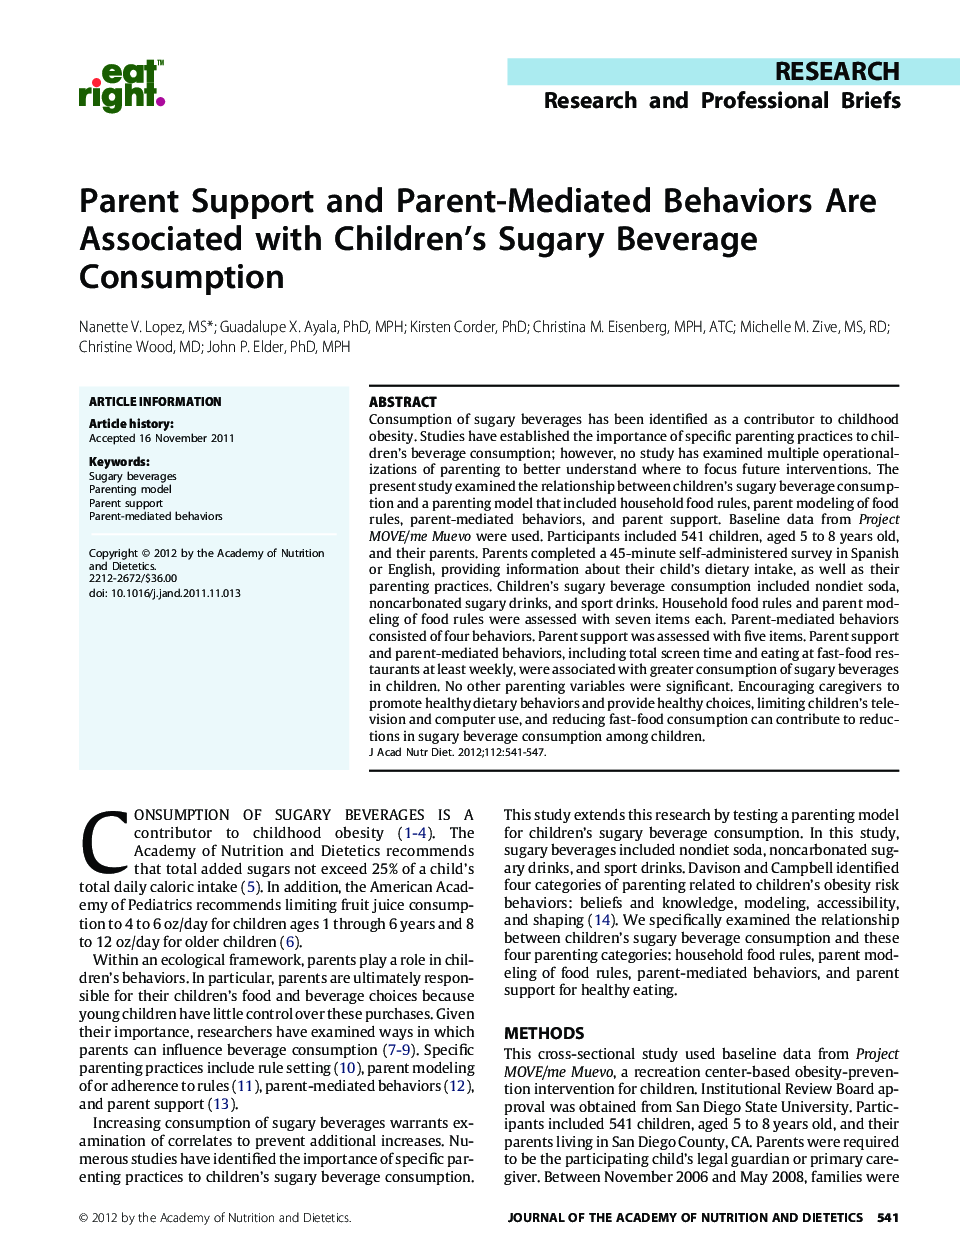 Parent Support and Parent-Mediated Behaviors Are Associated with Children's Sugary Beverage Consumption